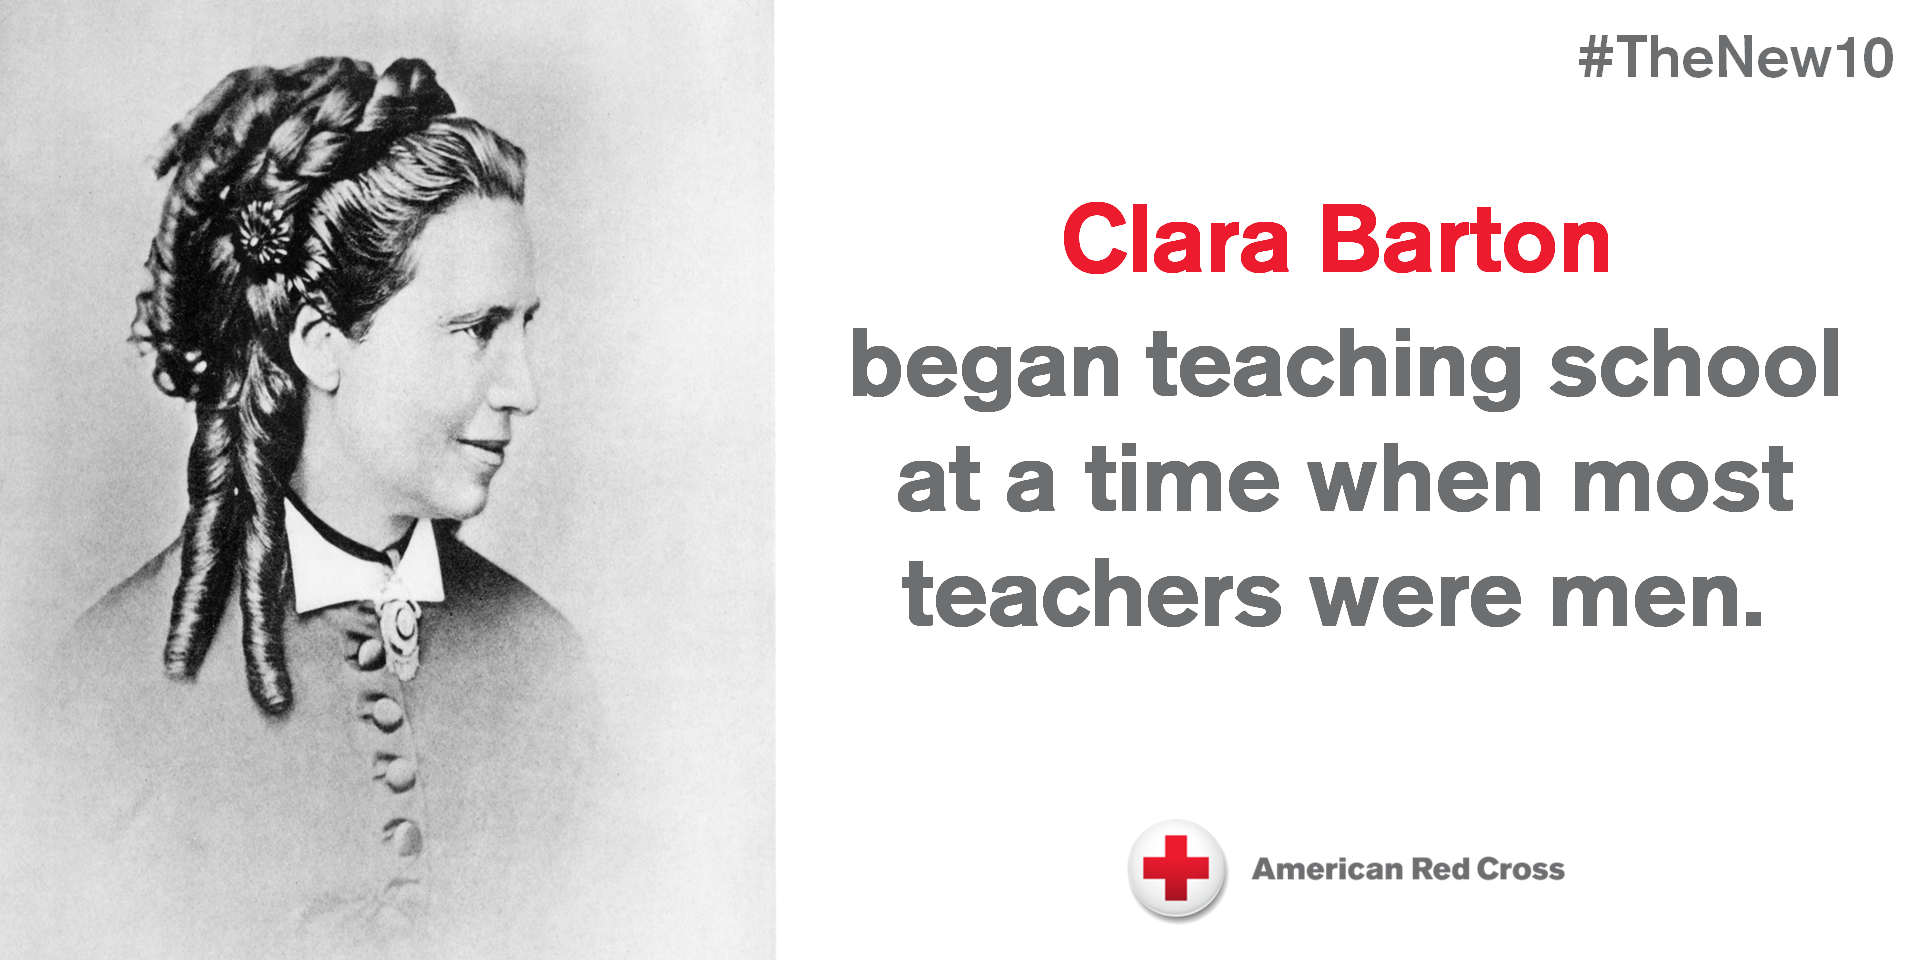 13 Reasons Why Clara Barton Should Be on #TheNew10 - red cross chat